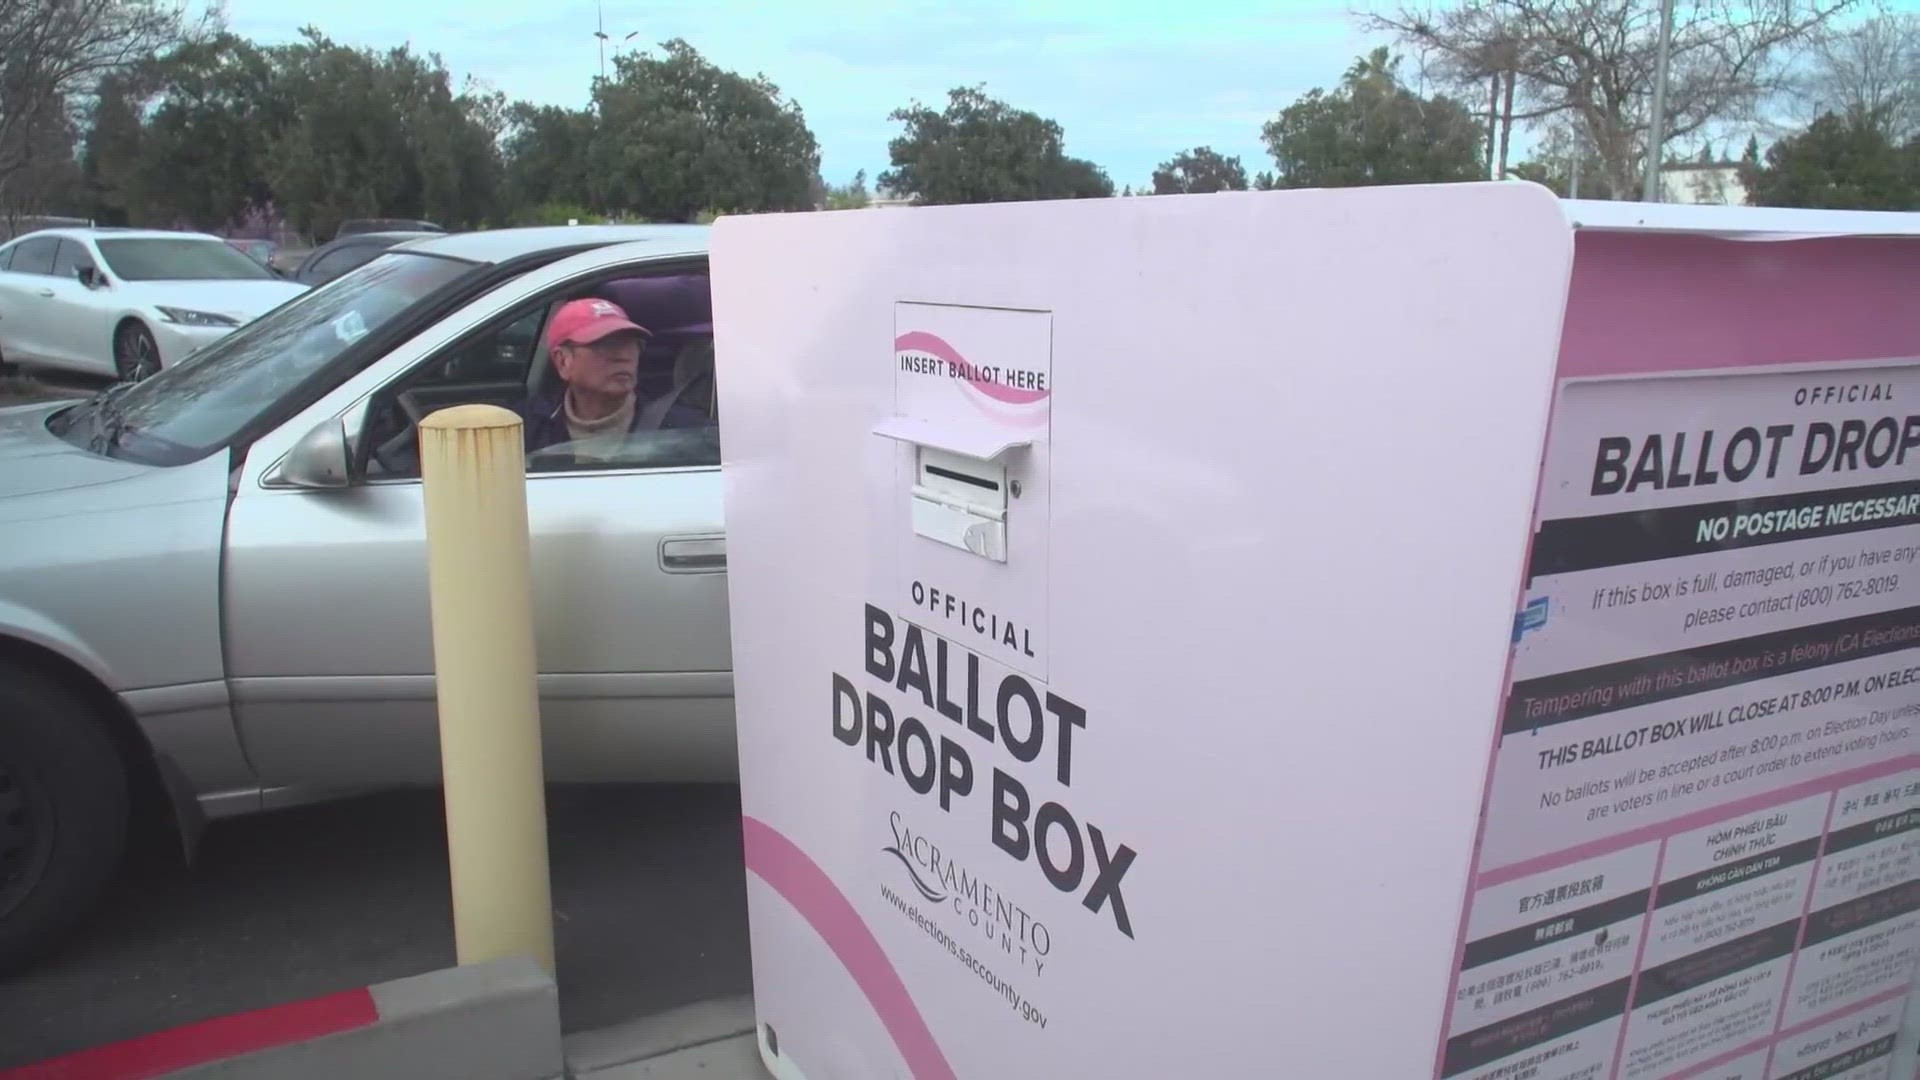 Sacramento County spokesperson Ken Casparis said that doesn't take into consideration the large size of the county and number of registered voters.